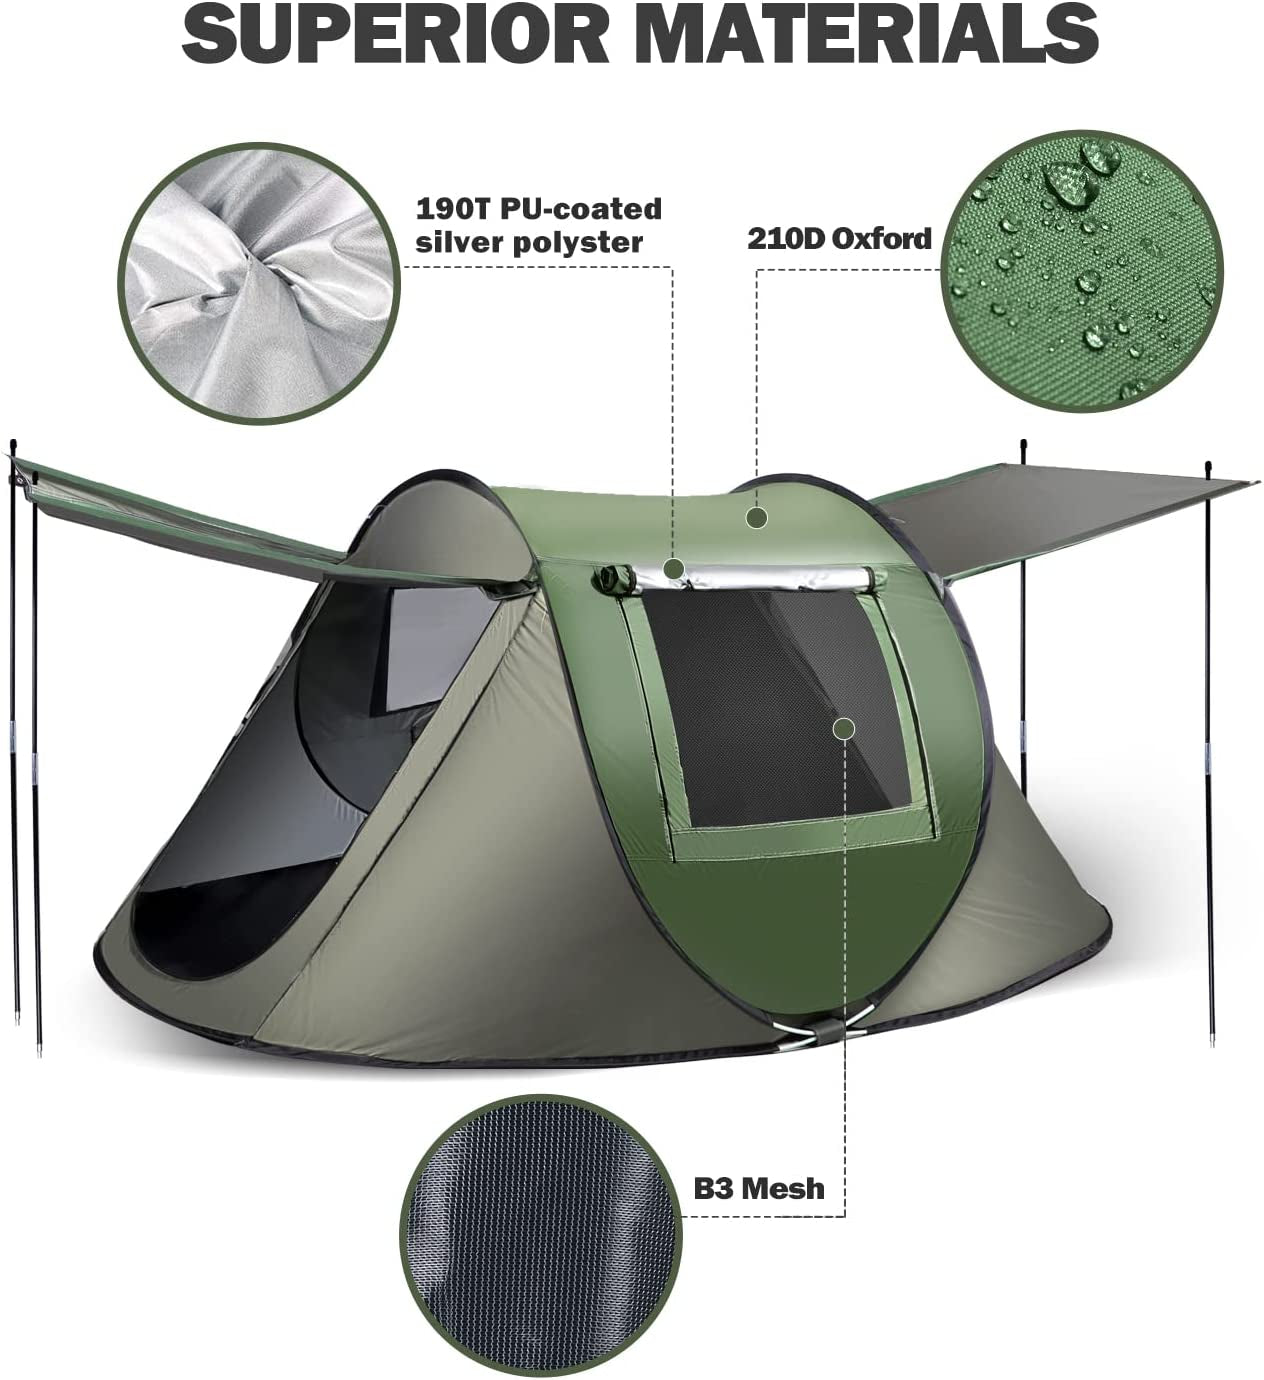 Instant Pop up Tent, Automatic Easy Setup Outdoor Waterproof Windproof Family Tent, Upgraded 2 Doors Vestibule Sun Shelter for 2/3 People Outdoor Camping,Travelling,Hiking, Beach,Green